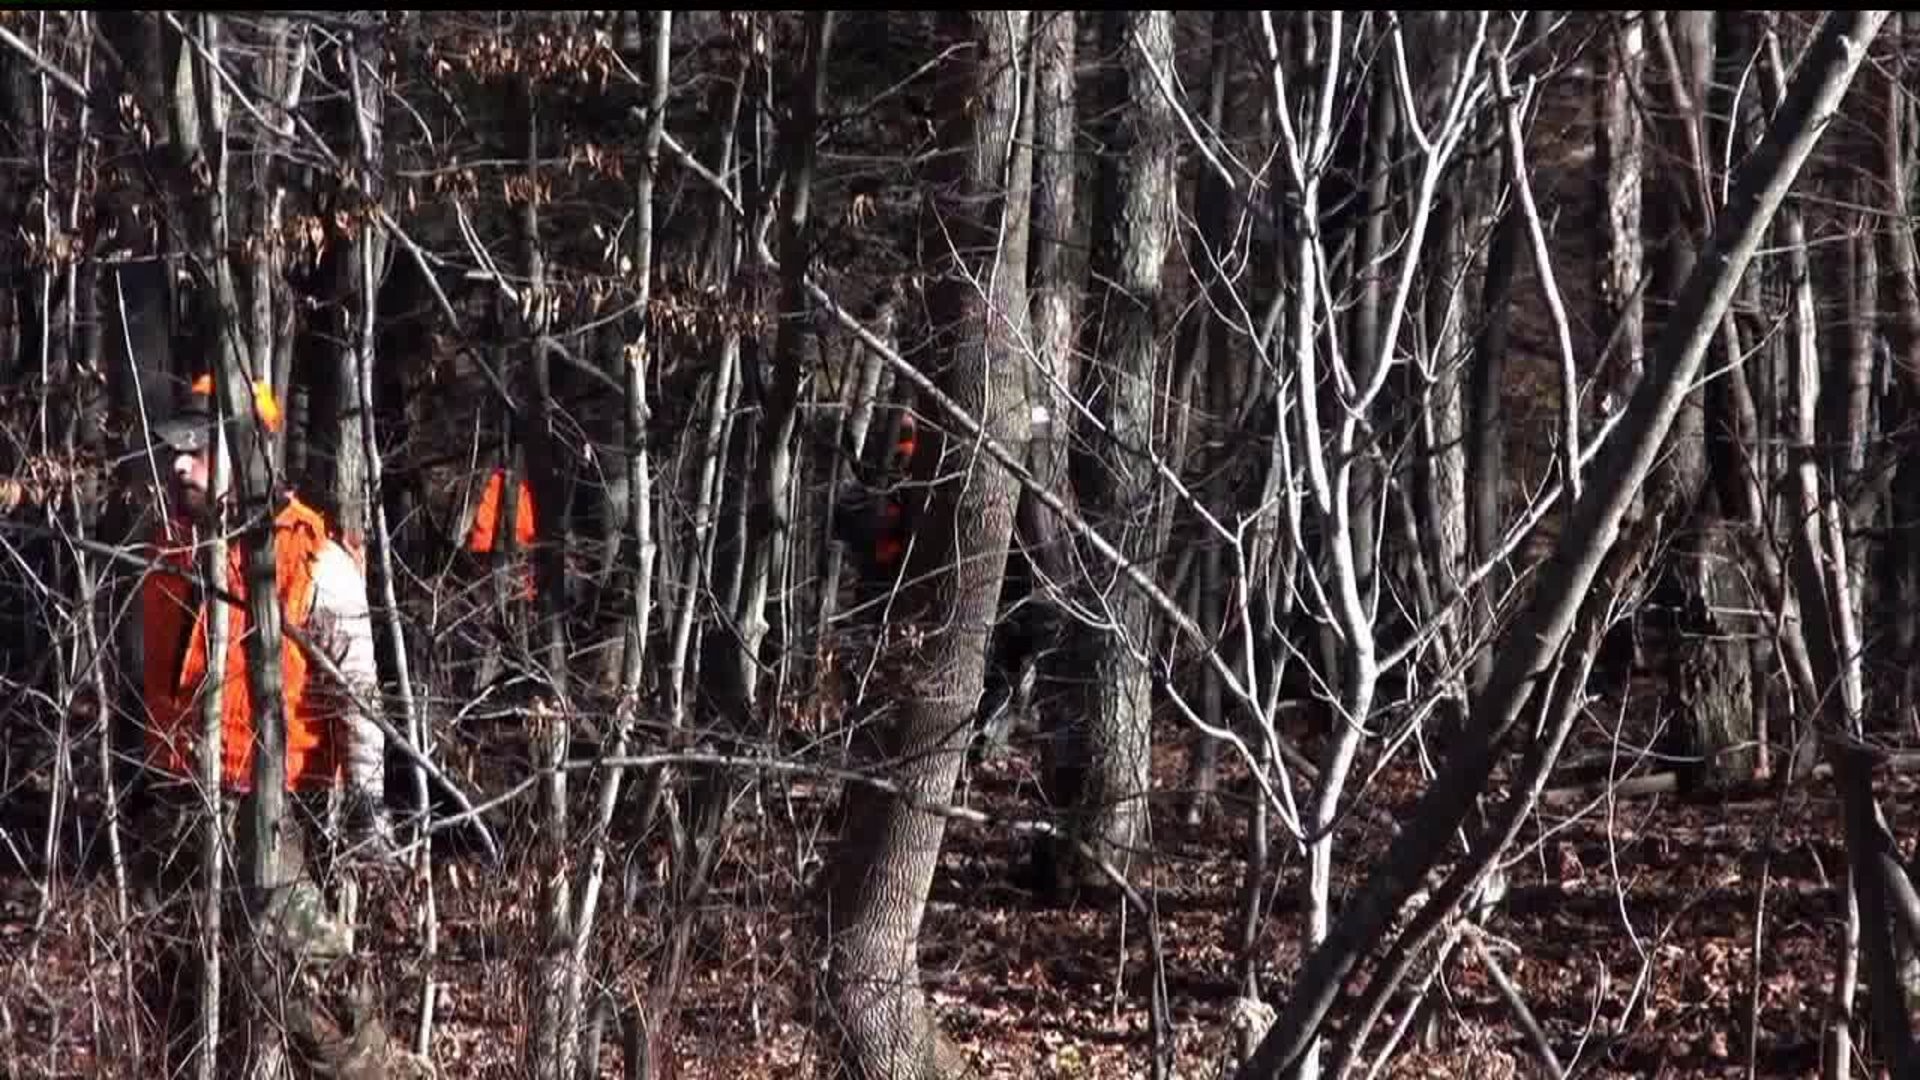 Pa. Game Commission Votes to Change Start of Firearms Deer Season